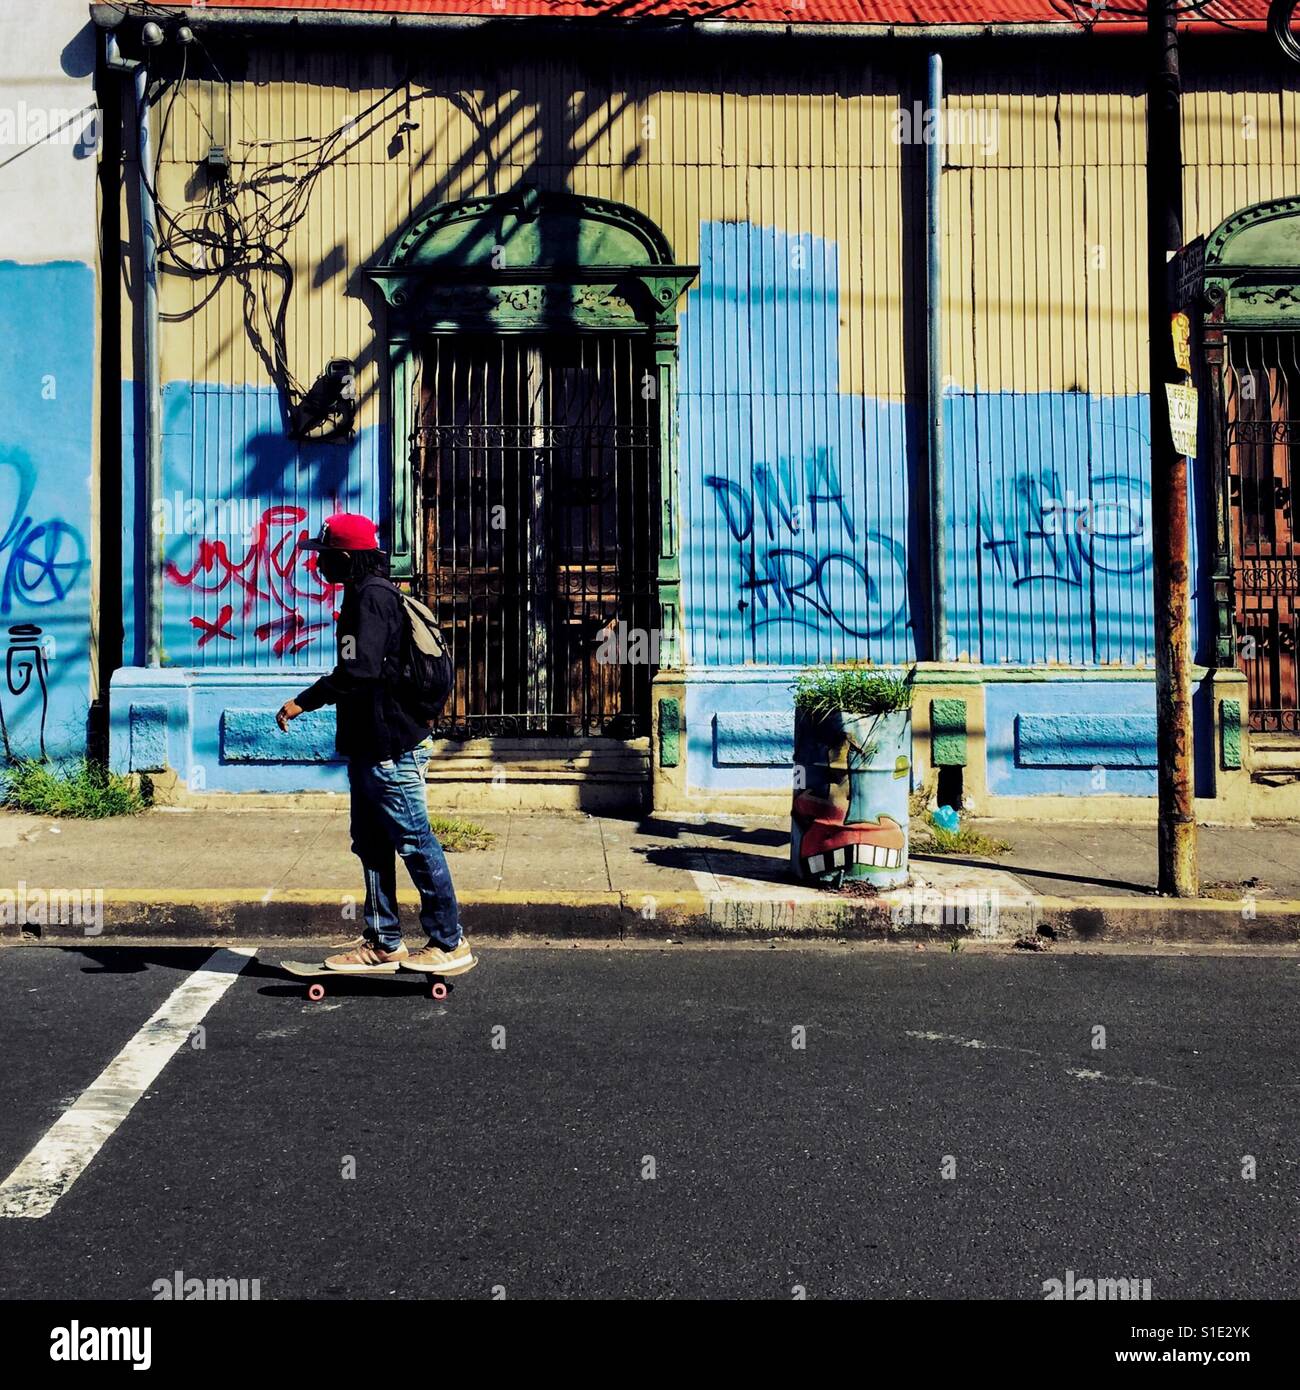 A Salvadoran young man rides a skateboard in front of a lower middle class house, with Spanish colonial architecture elements, built in the center of San Salvador, El Salvador, 14 November 2016. Stock Photo